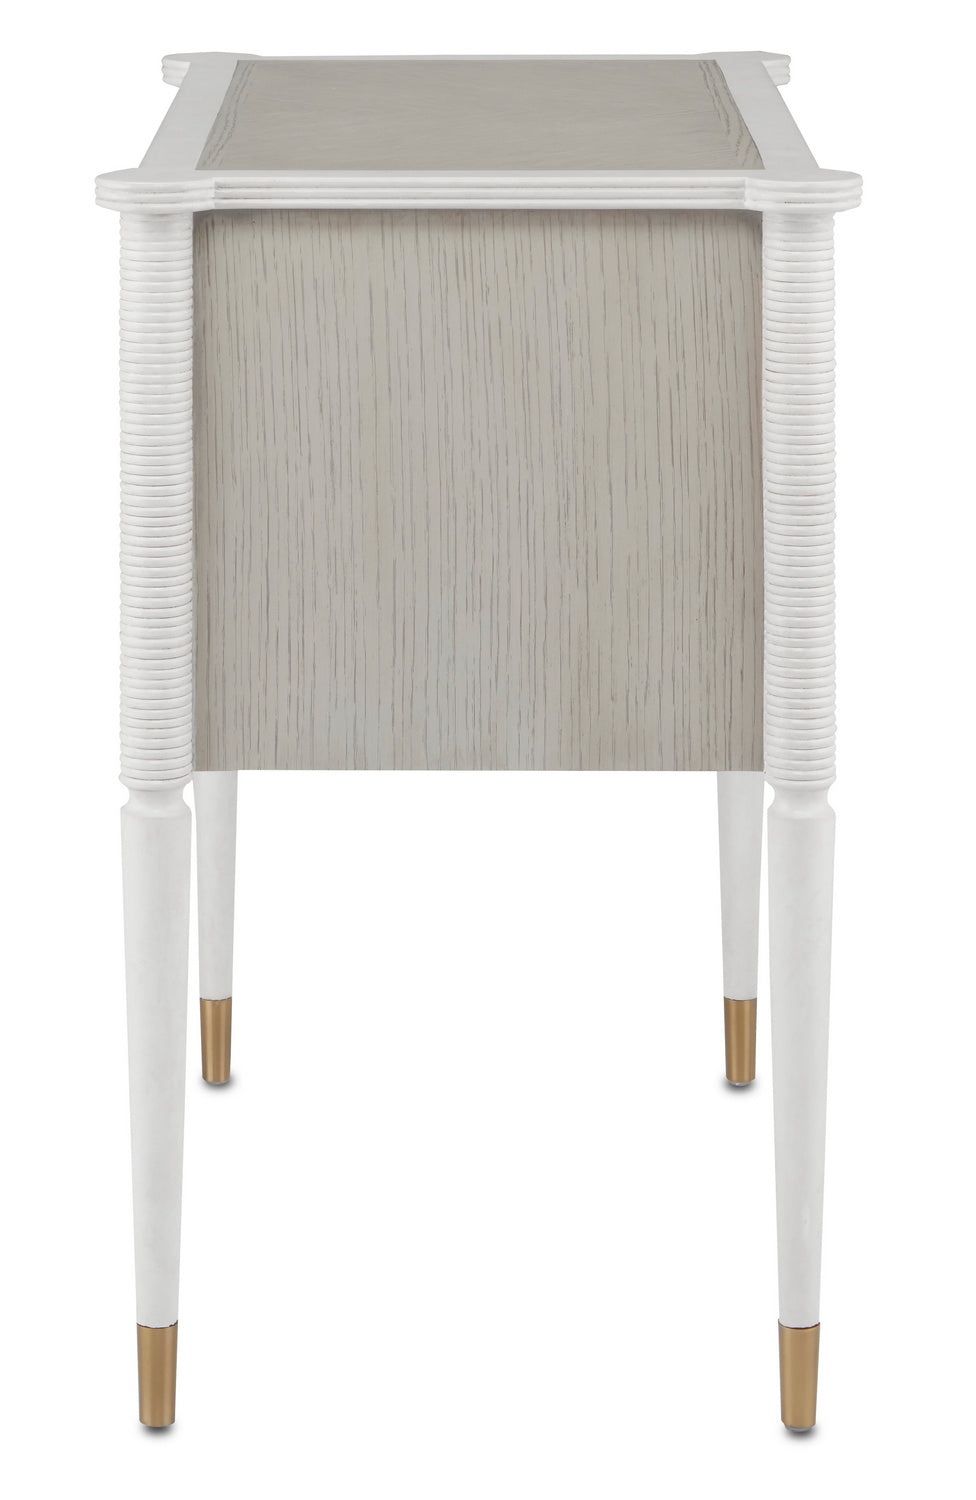 Nightstand from the Winterthur collection in Off White/Fog/Brass finish